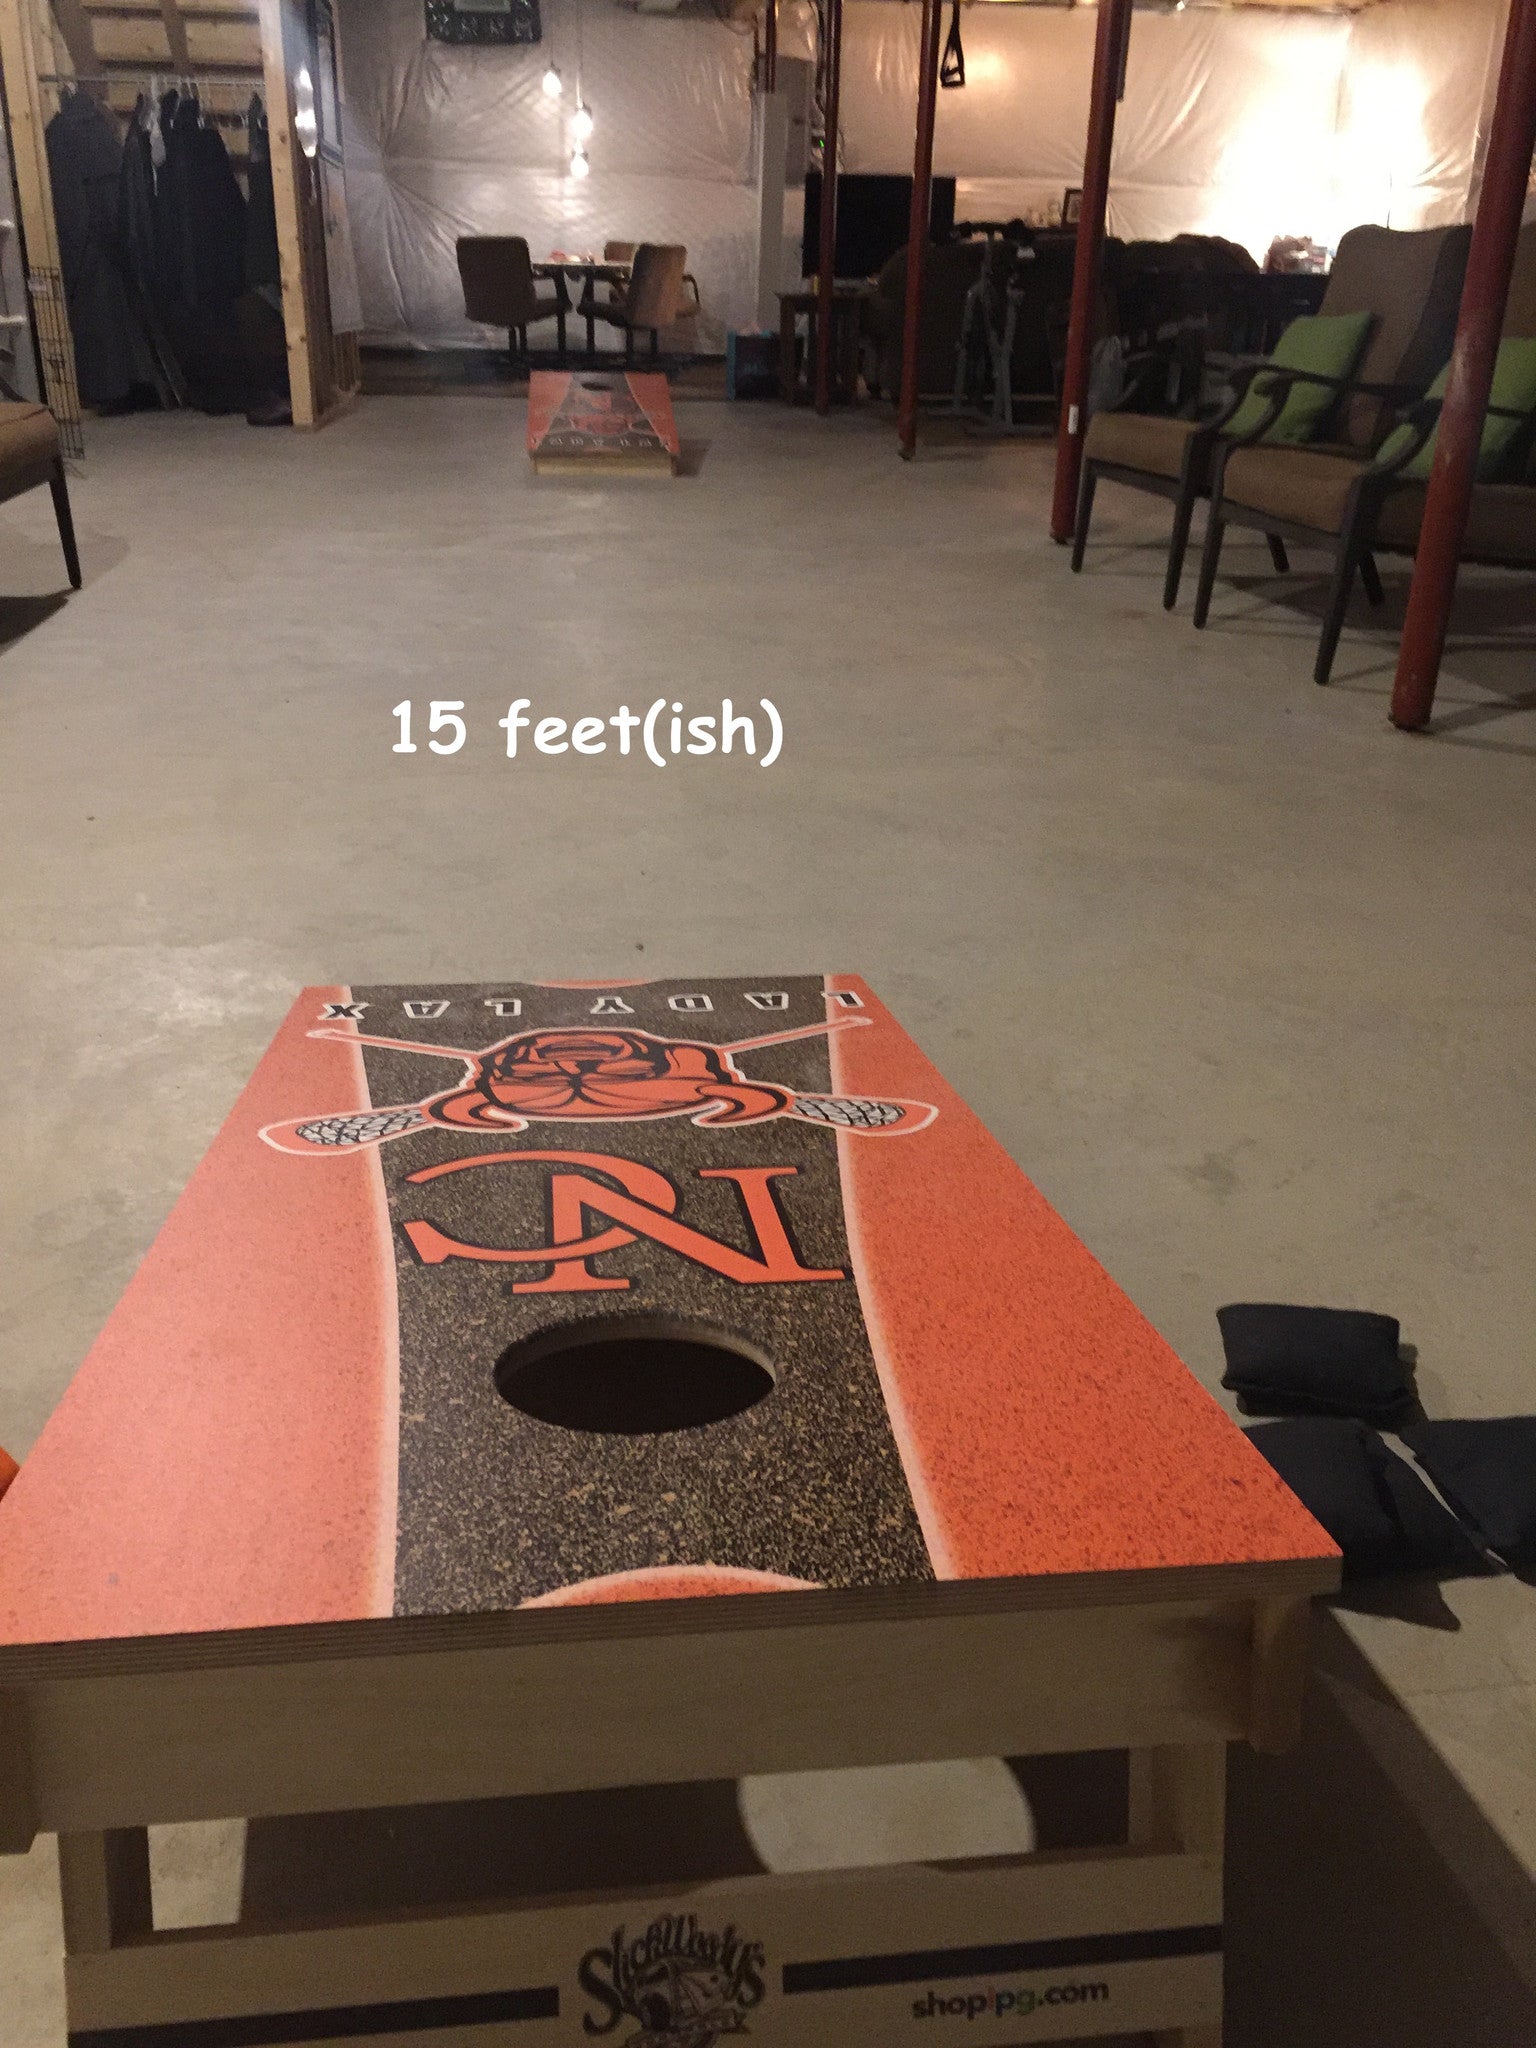 How to Play Indoor Cornhole: Tips for Getting Set Up Inside